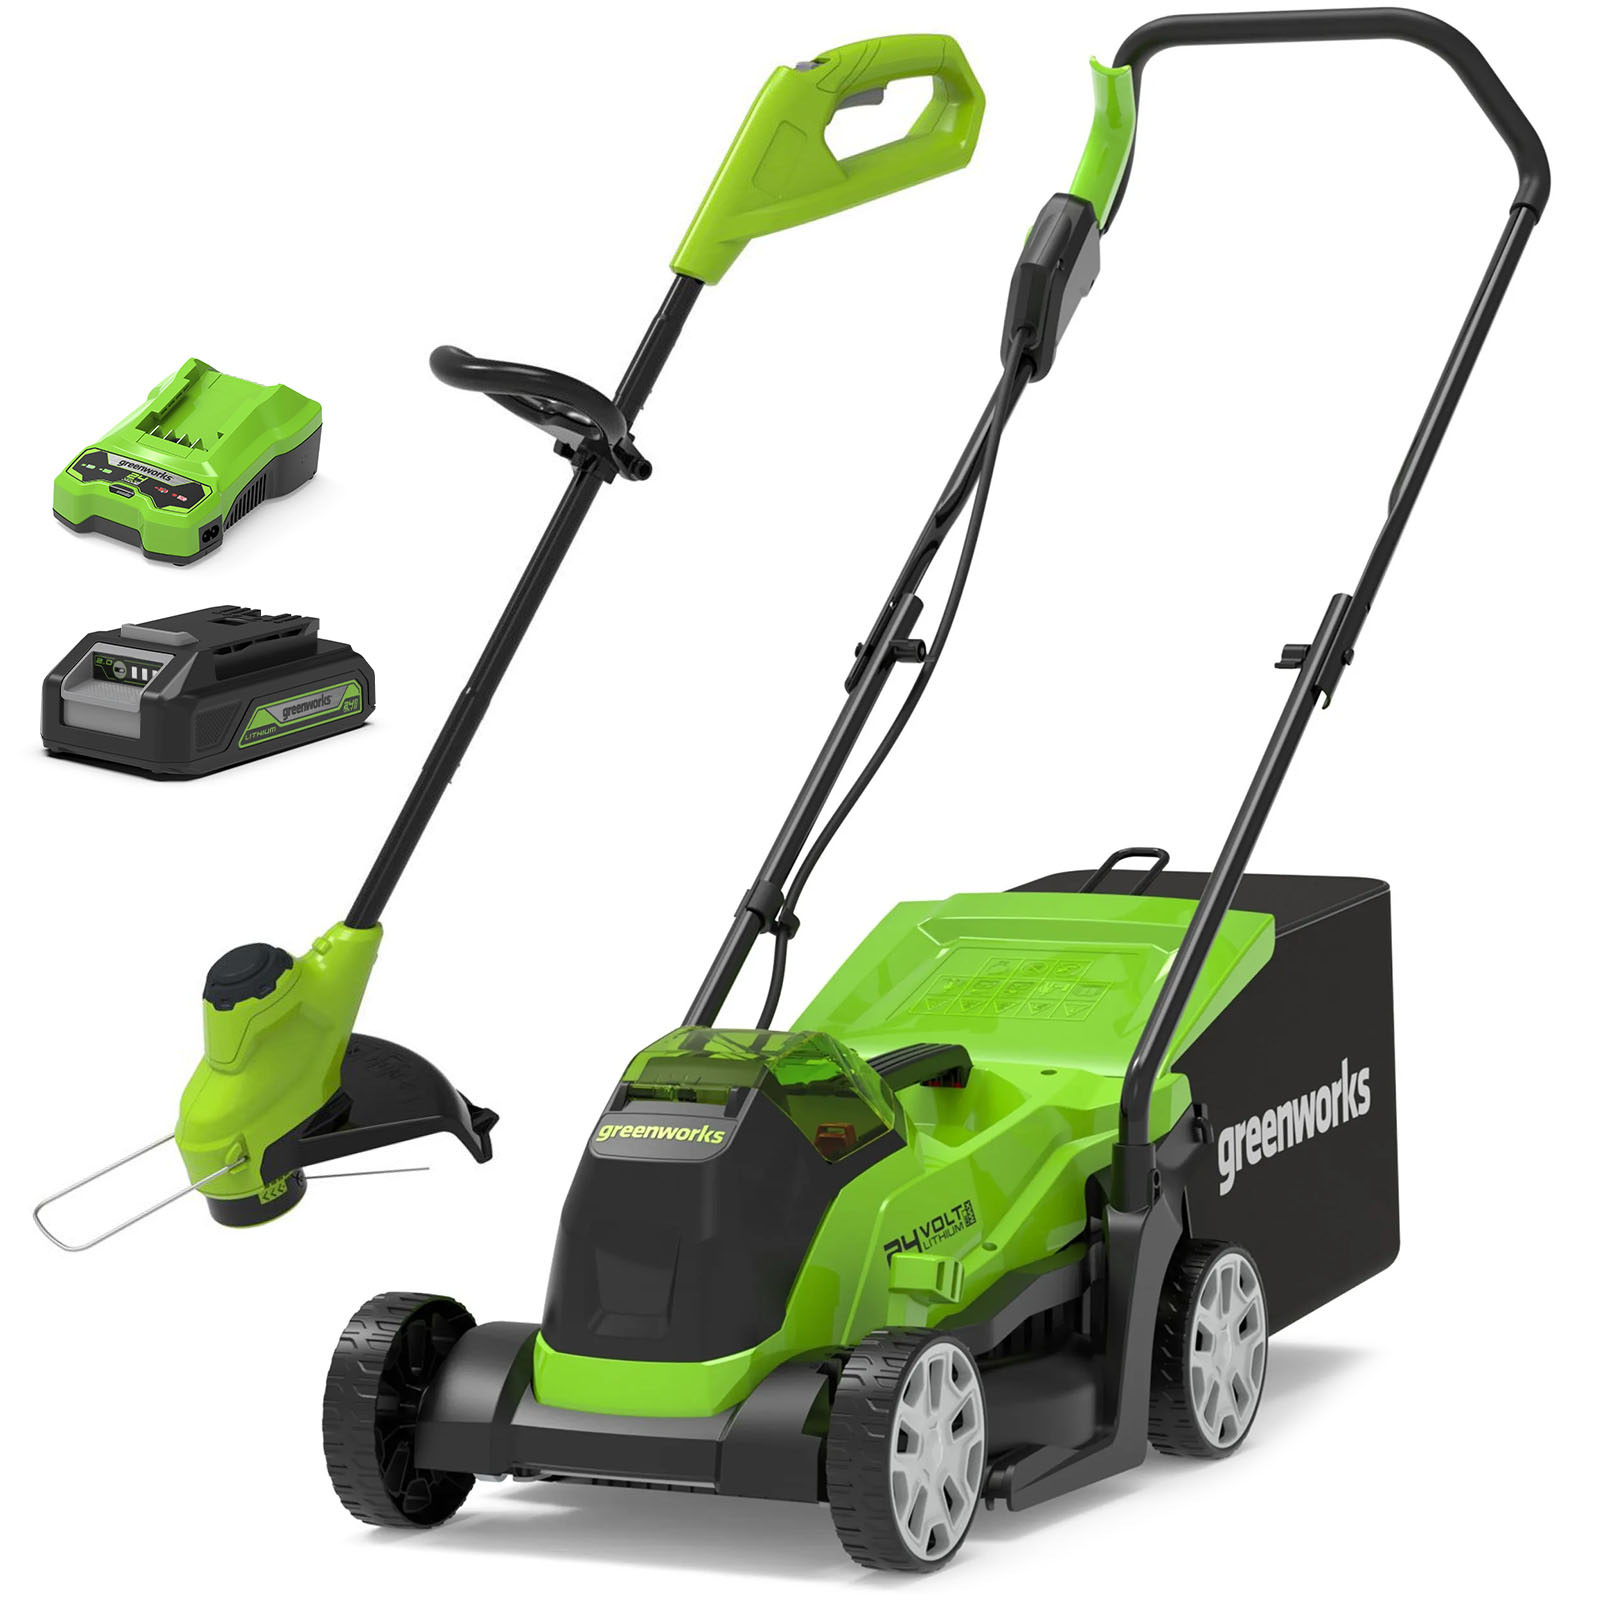 Photos - Lawn Mower Greenworks 24v Cordless Brushless Rotary Lawnmower 330mm and Grass Trimmer 